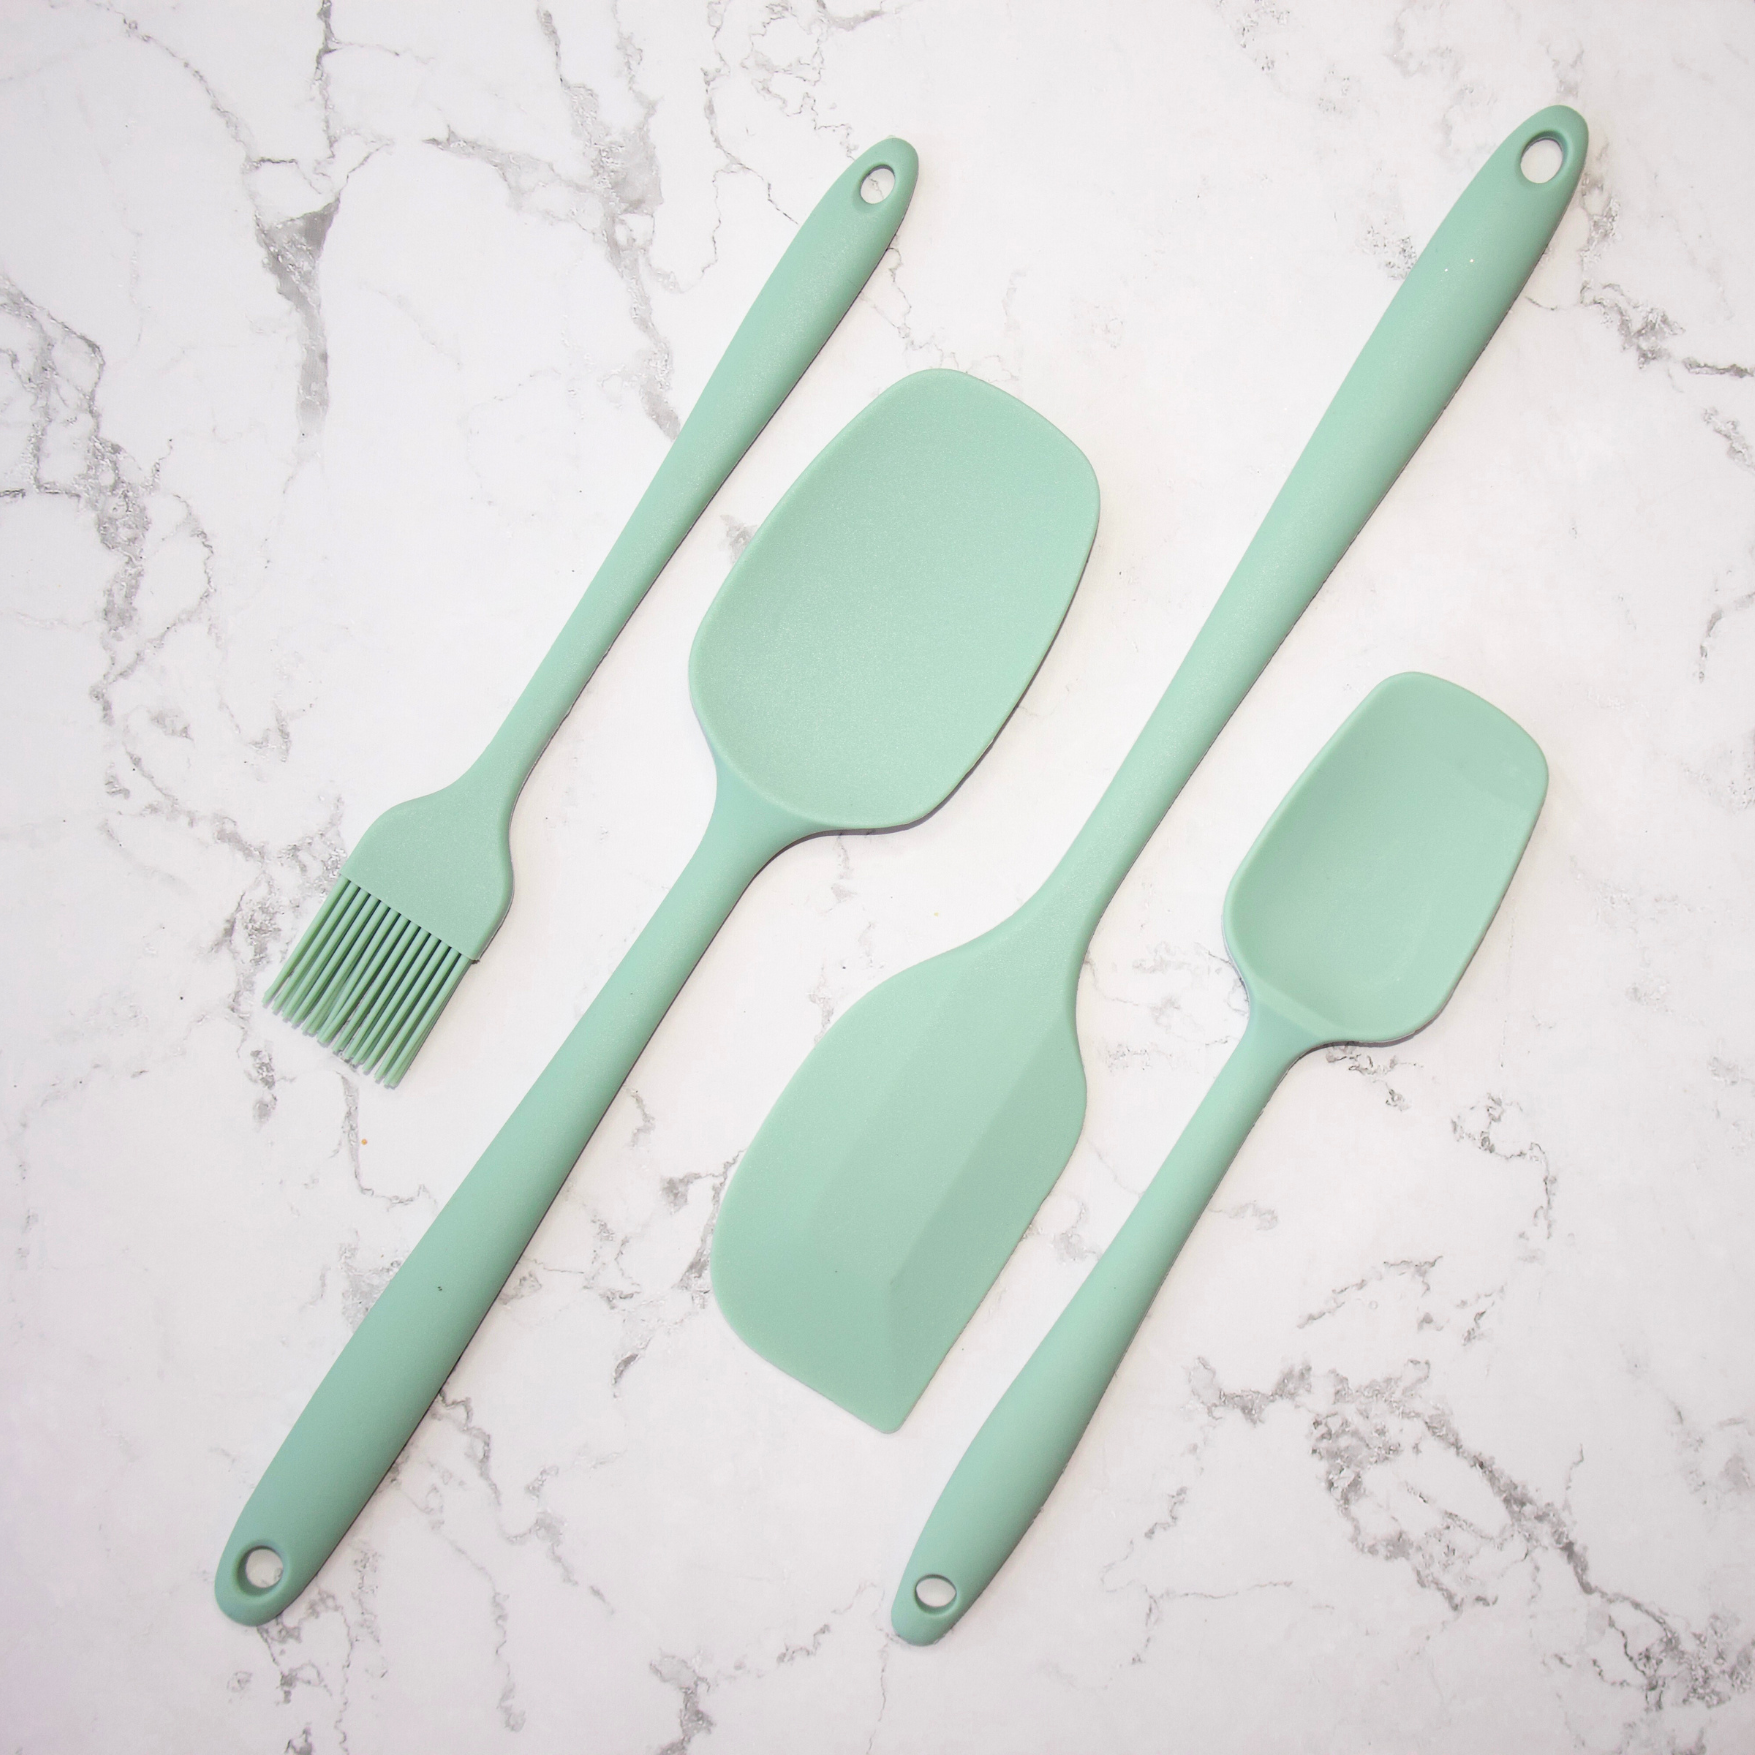 The best 3pc Heavy Duty Silicone Spatula set for baking, mixing